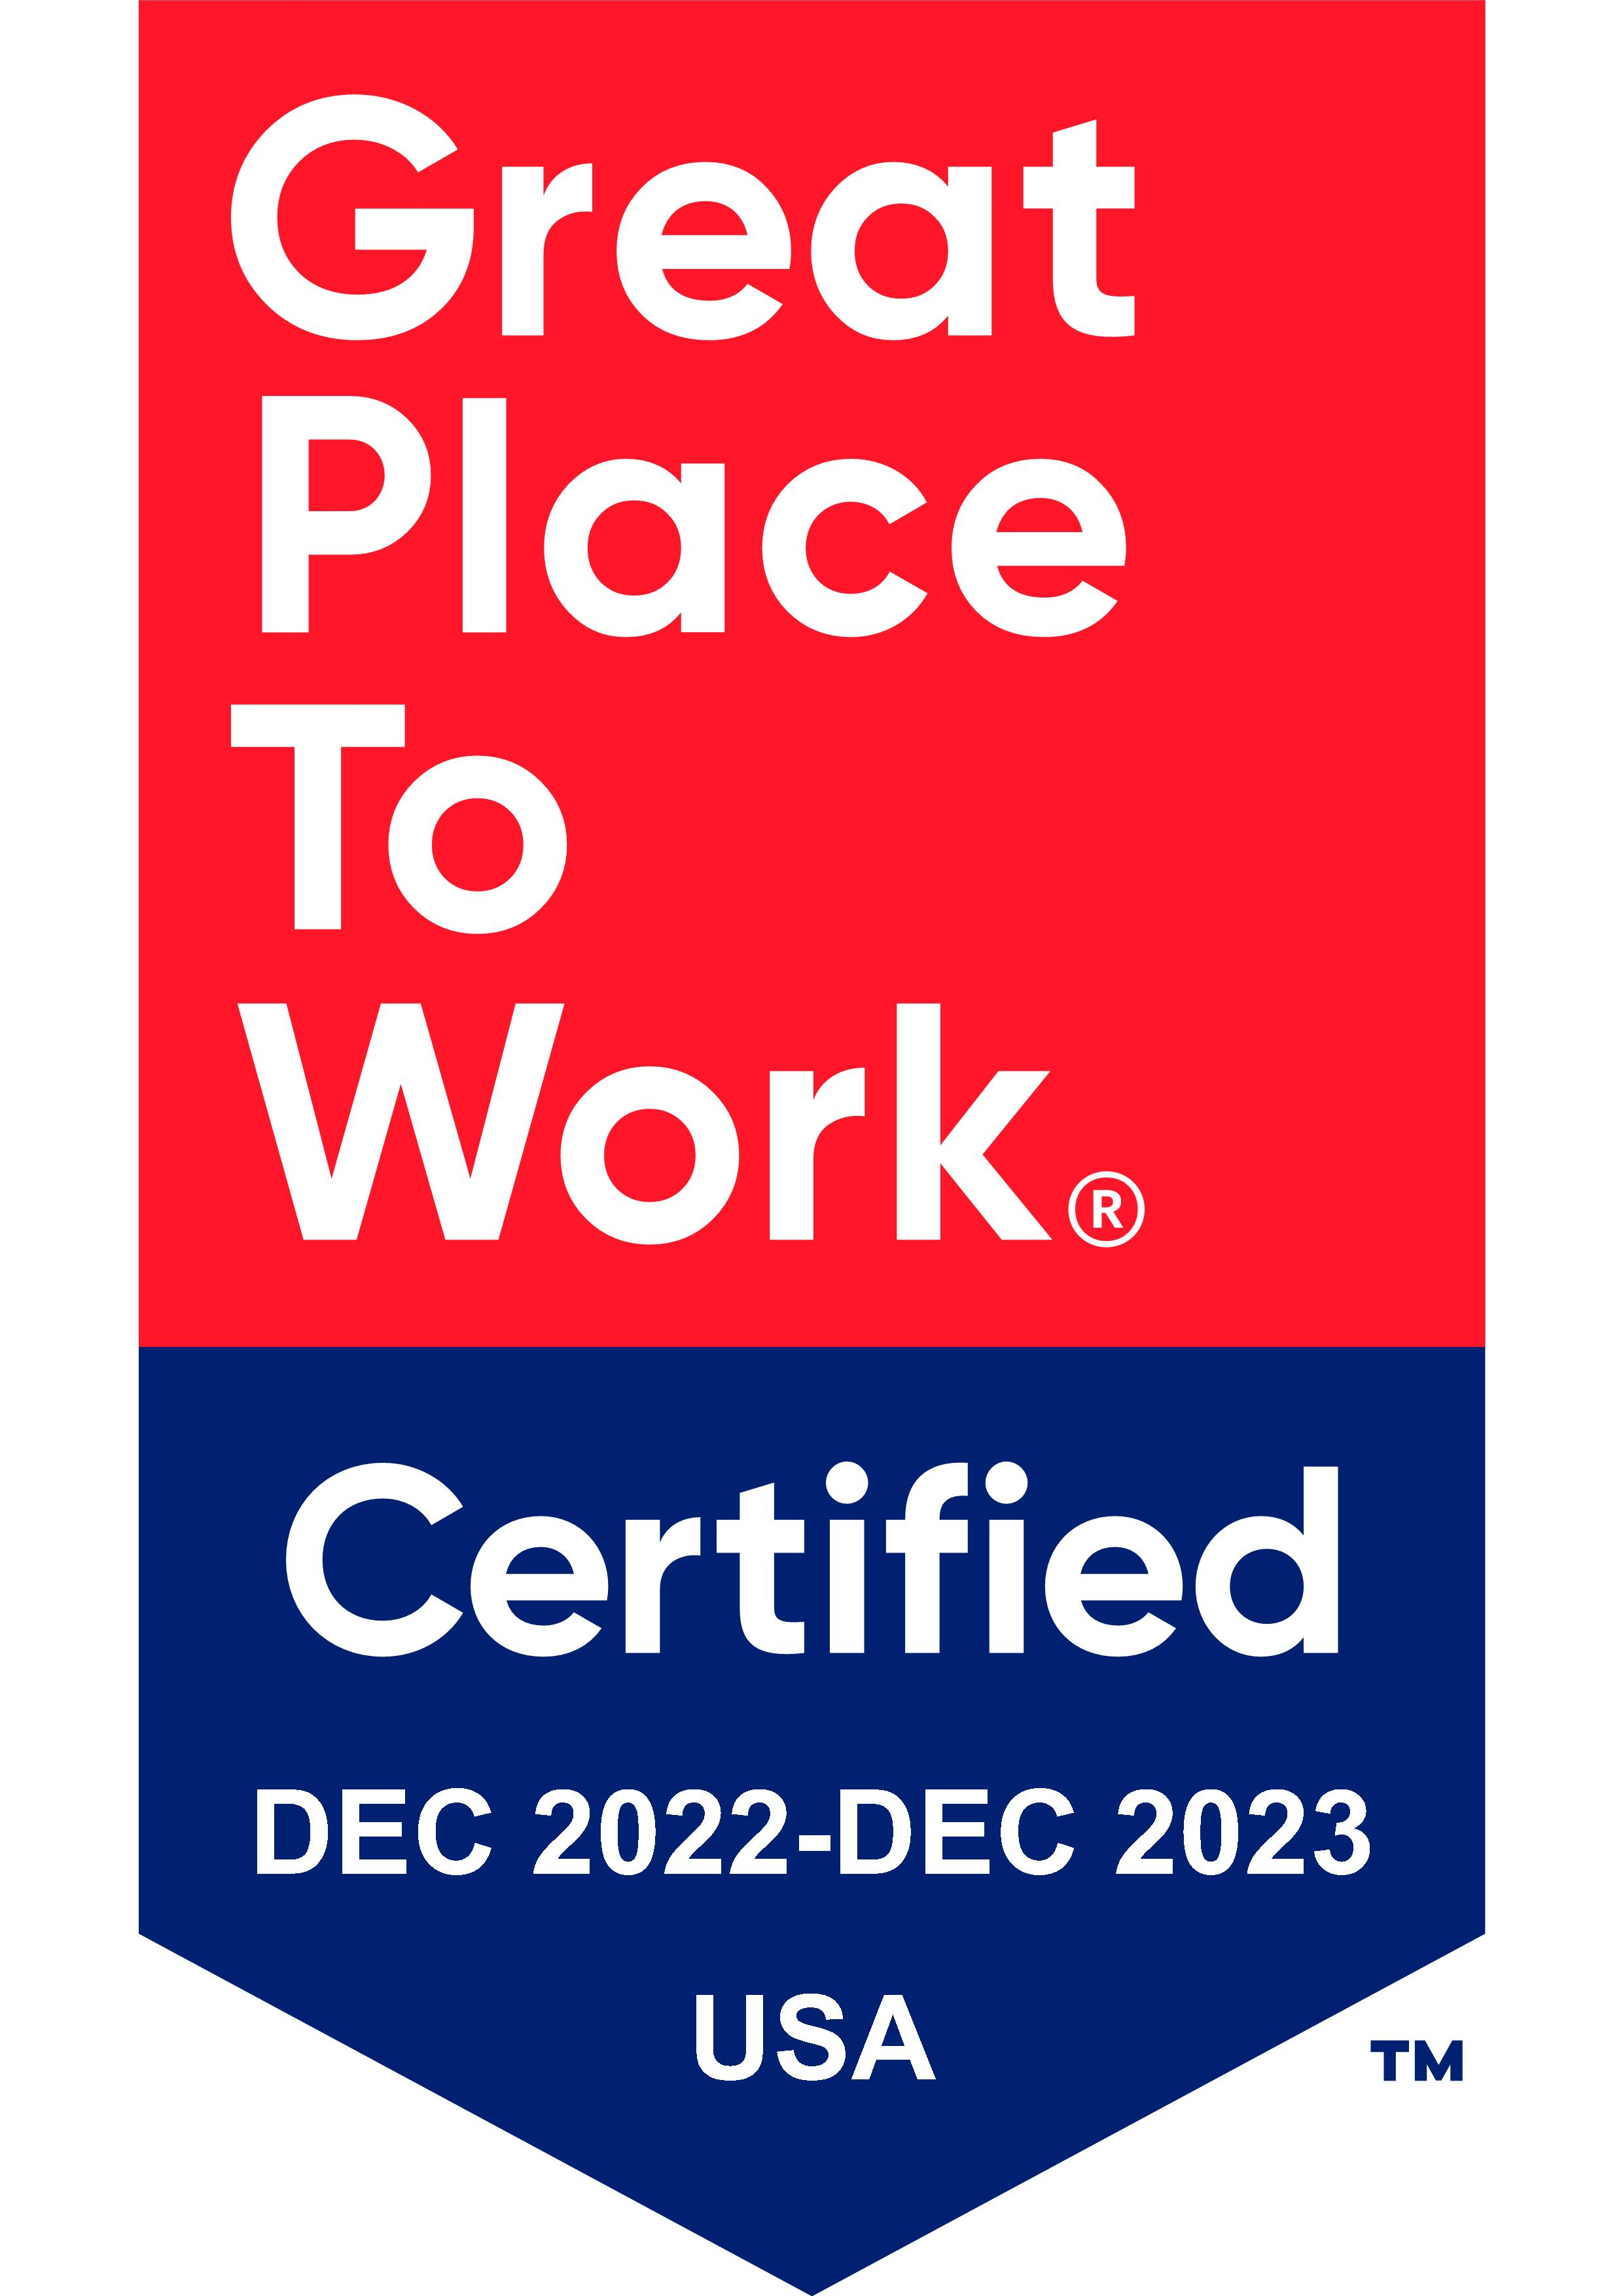 CoreLogic Earns Great Place to Work Certification™